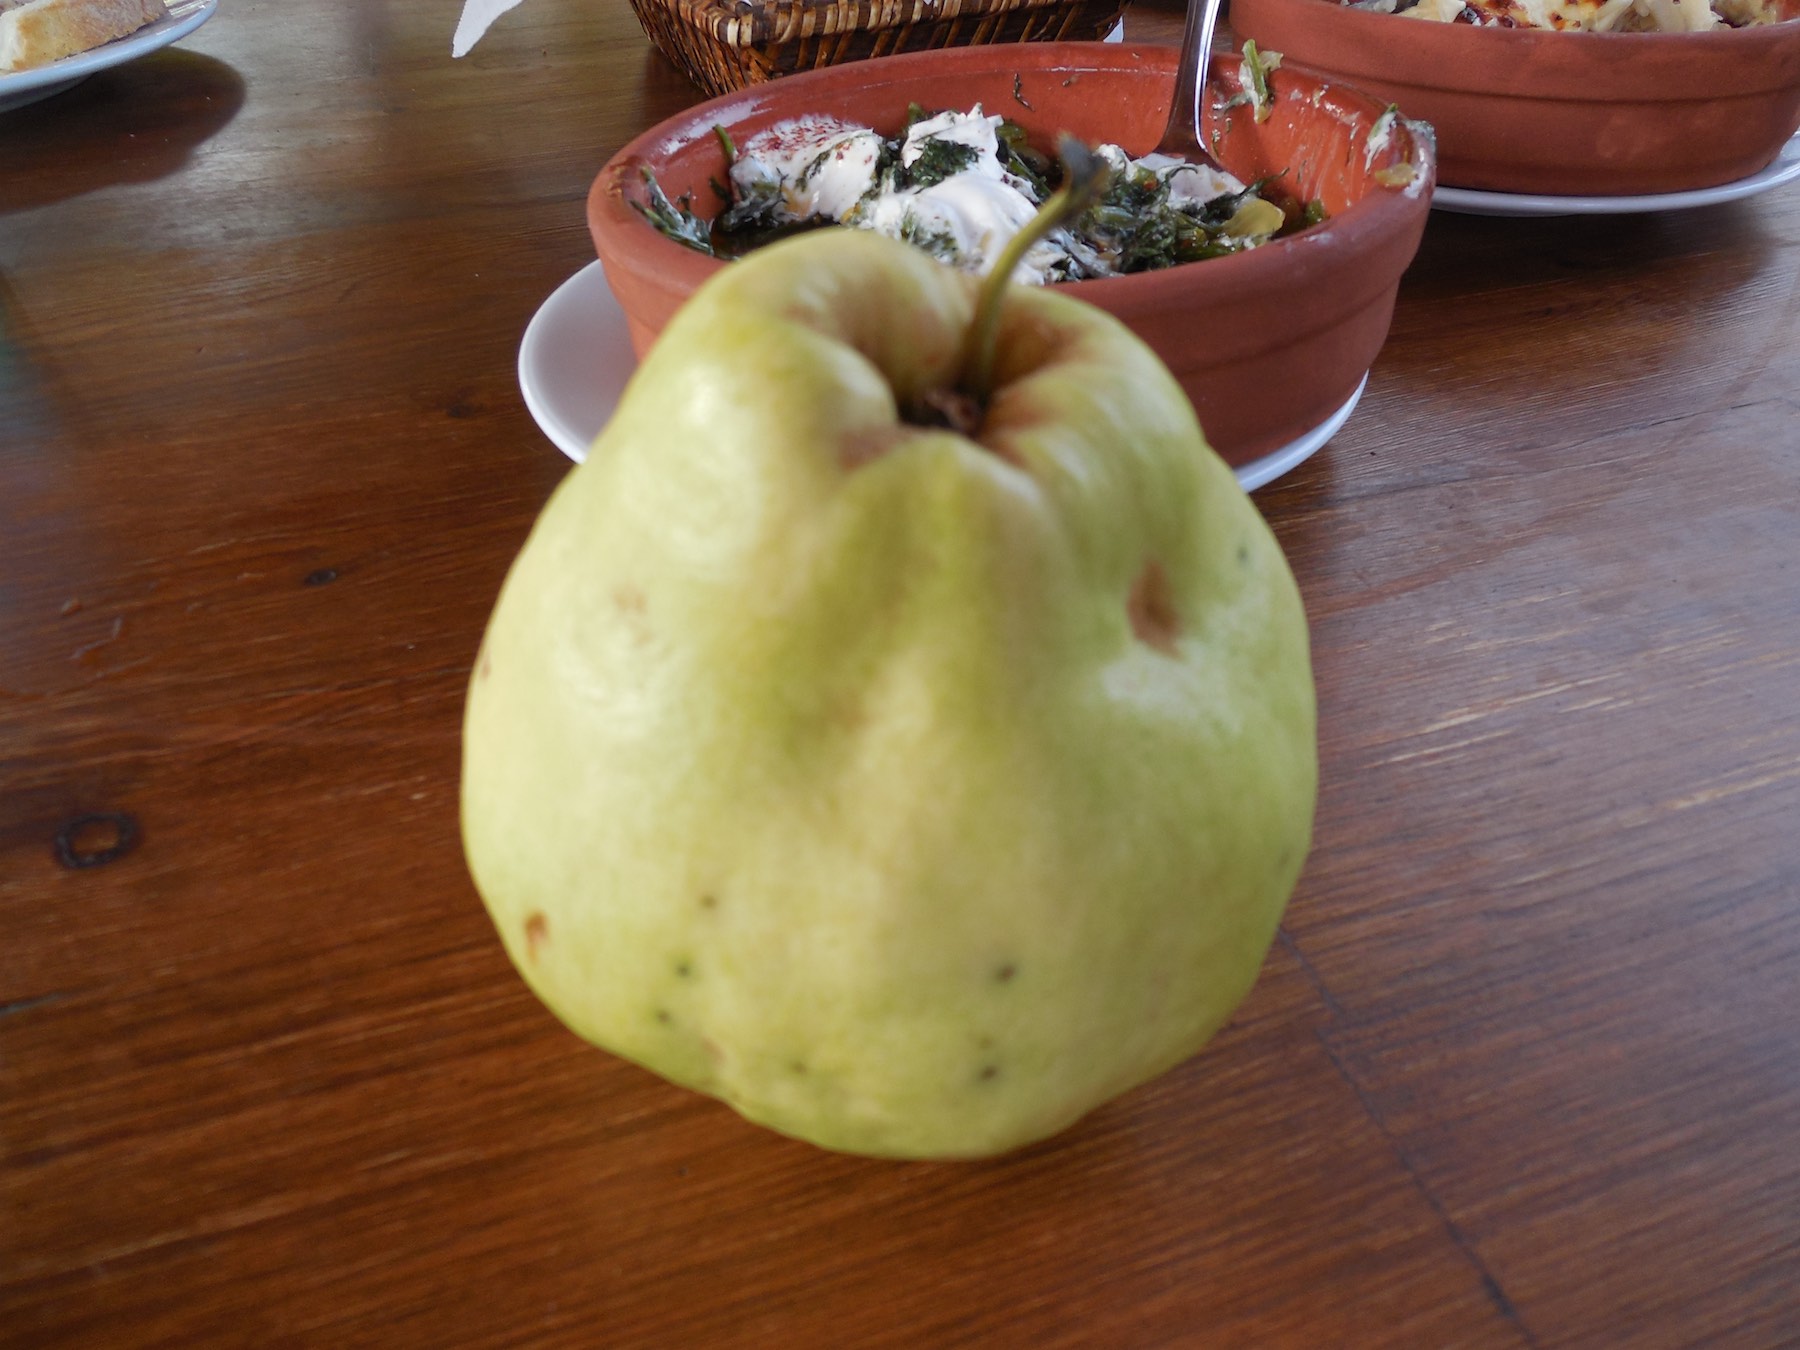 A quince is similar to a pear in look and taste.